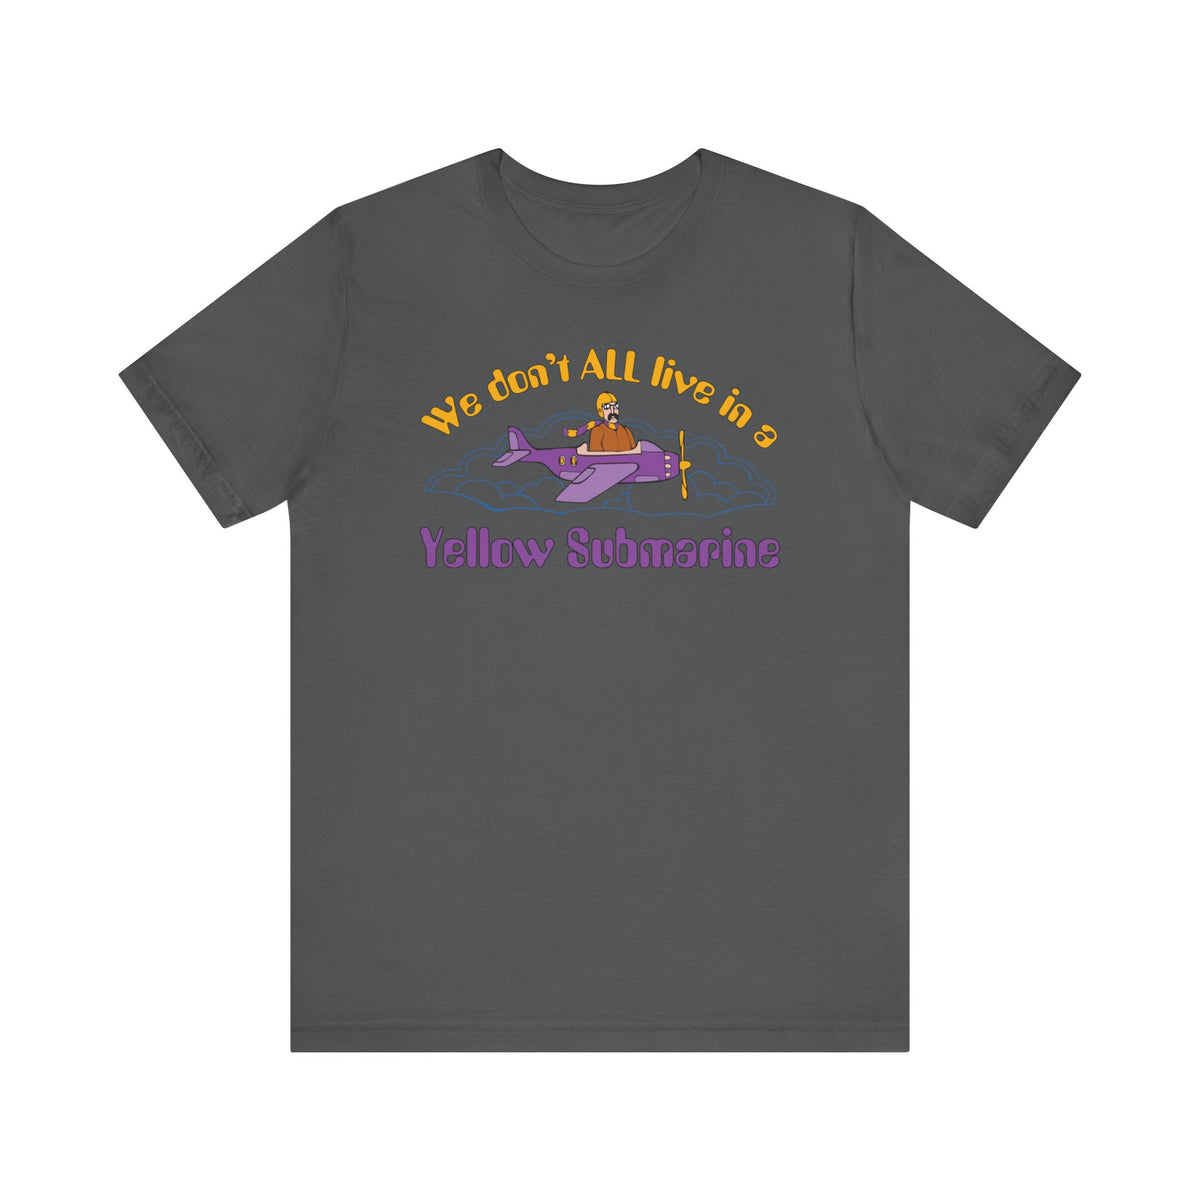 We Don't All Live In a Yellow Submarine - Men's T-Shirt